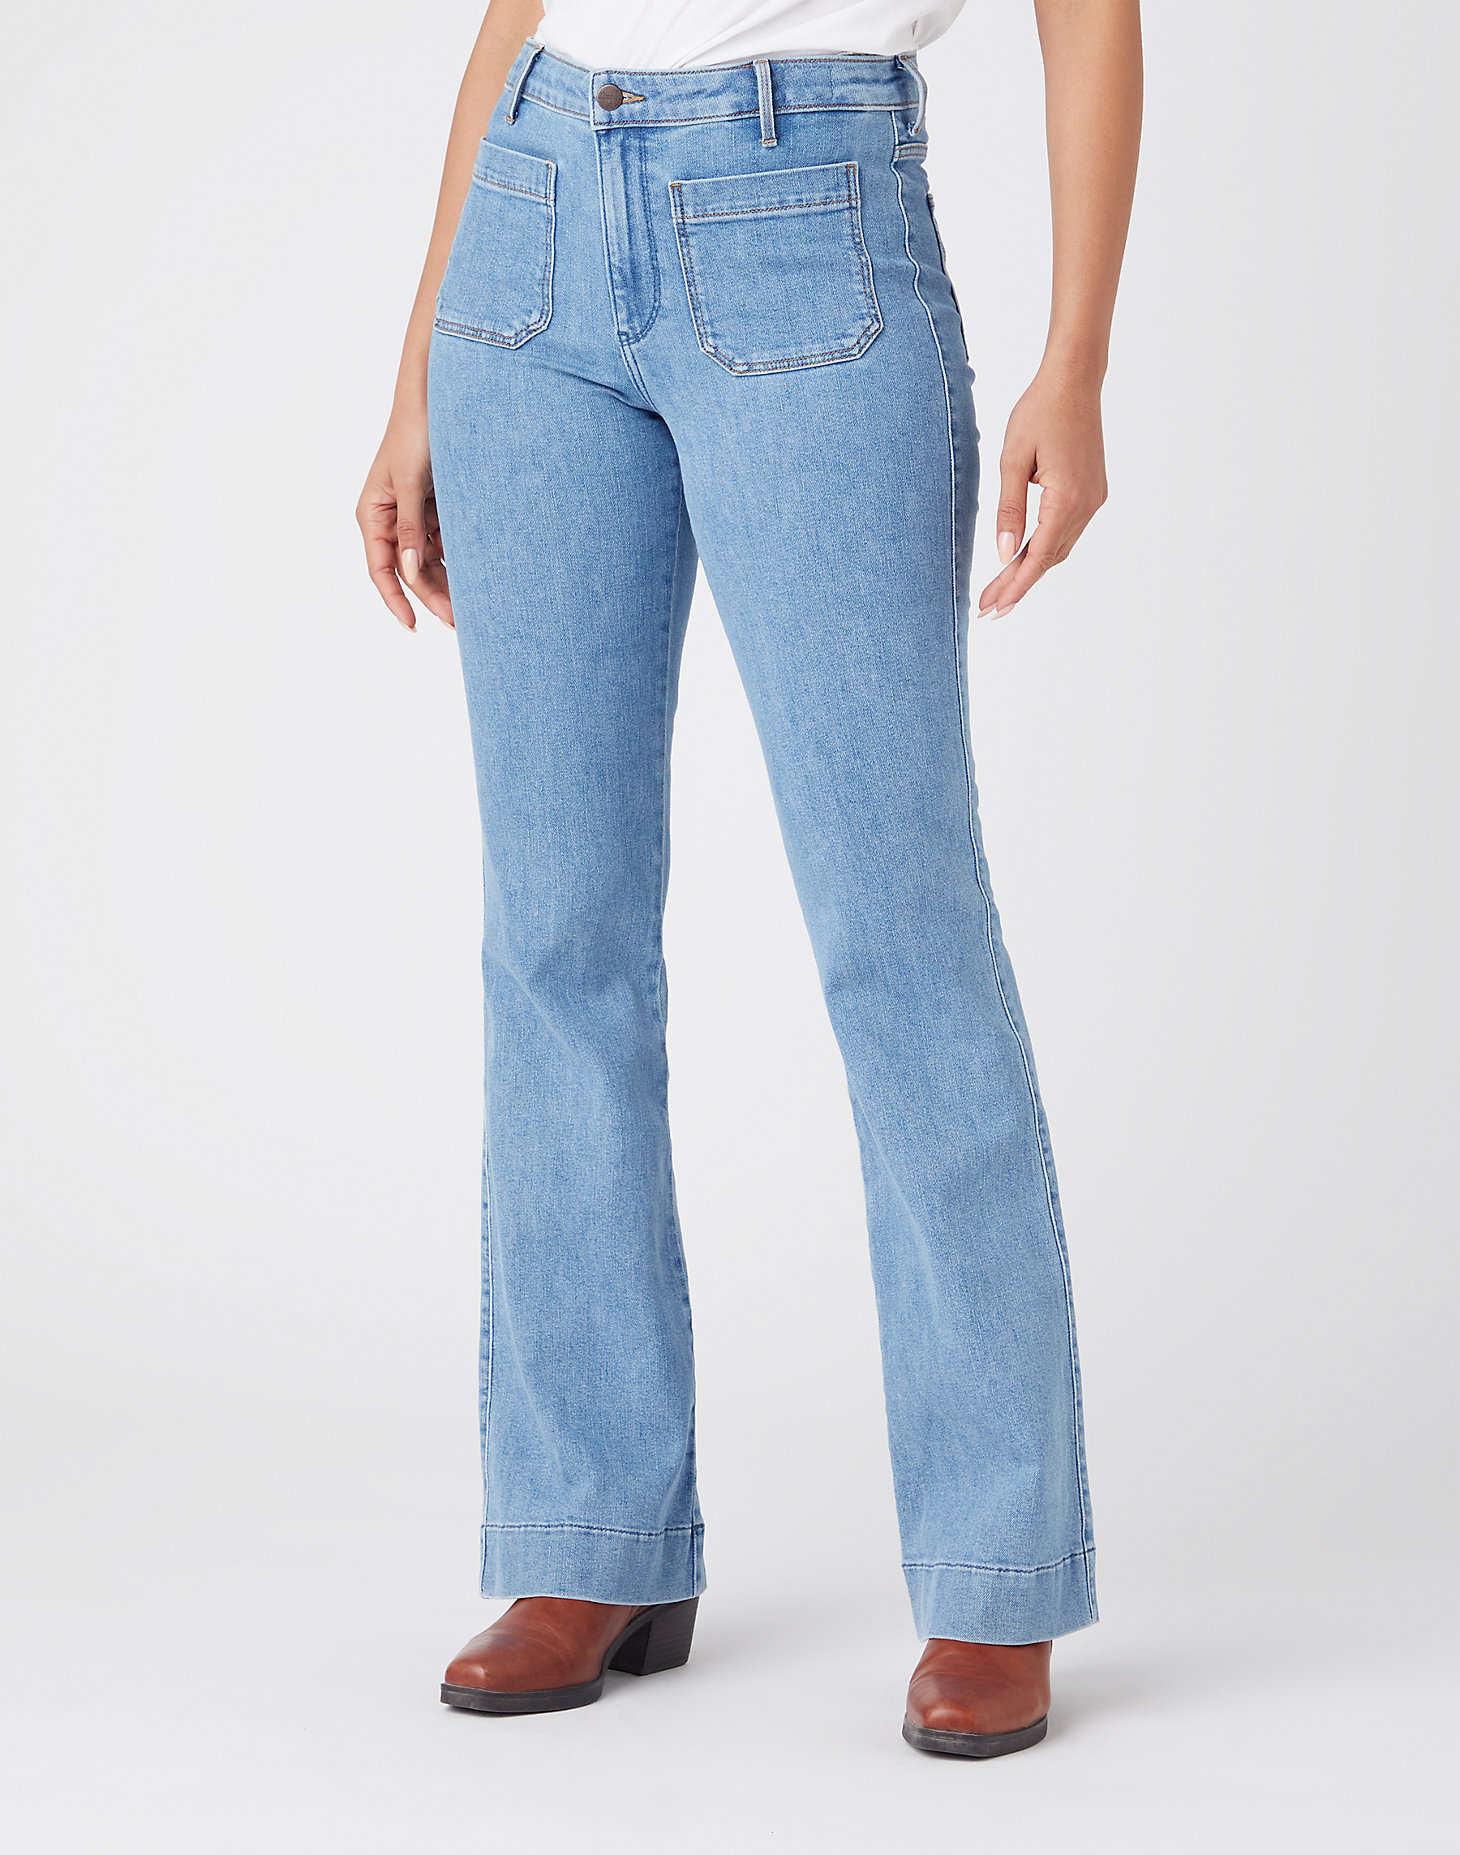 Flare Jeans in Cali Blue main view